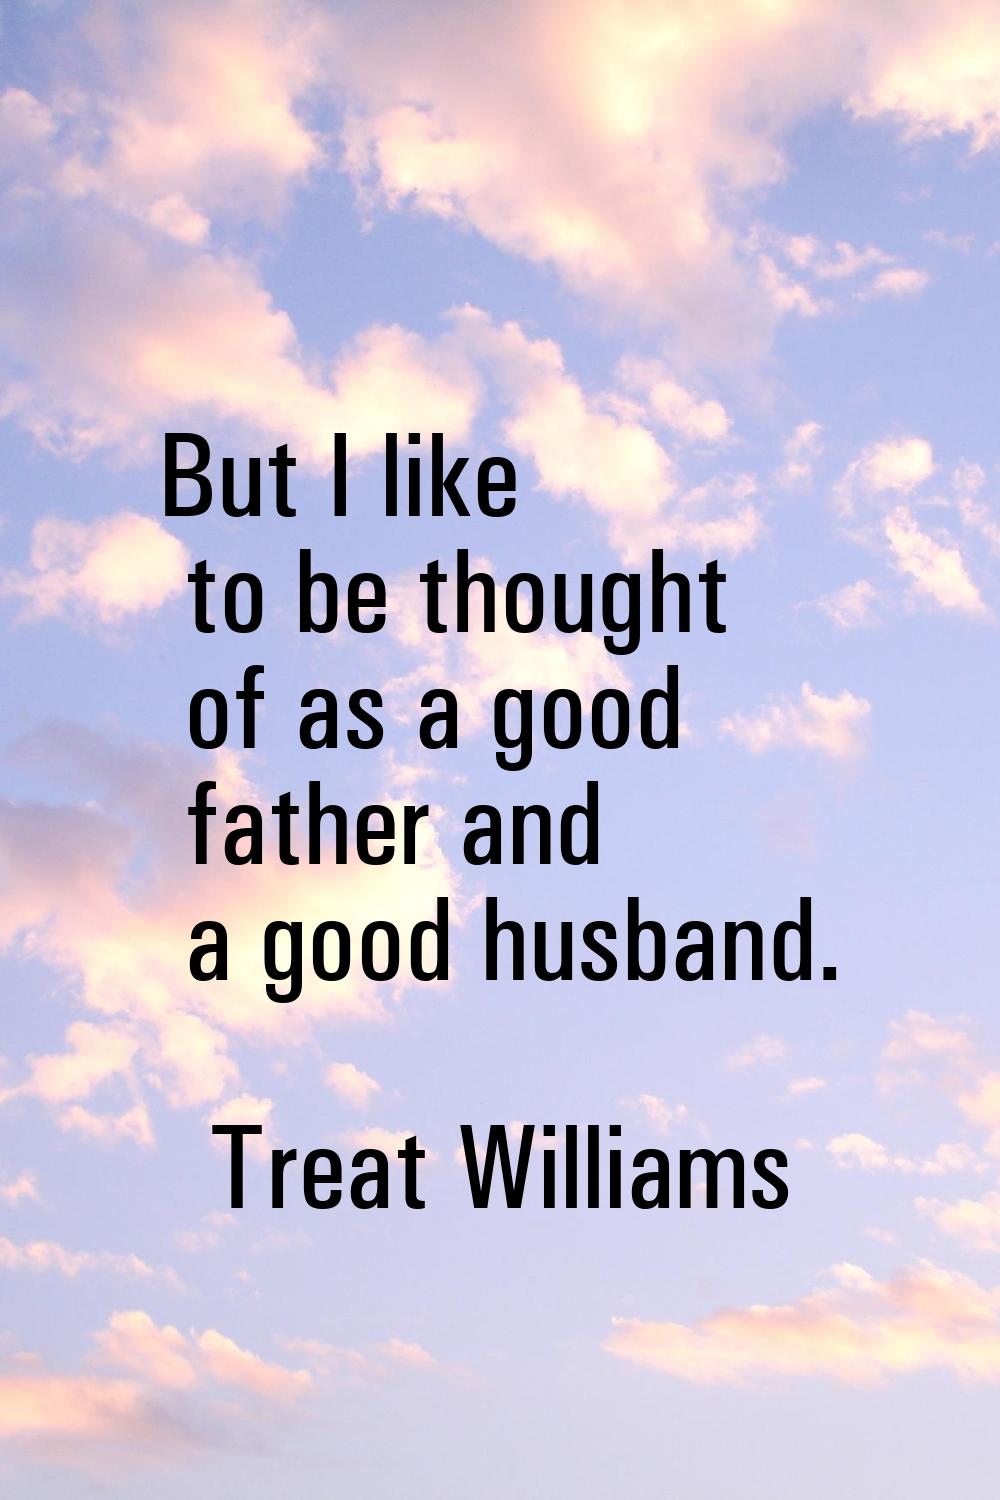 But I like to be thought of as a good father and a good husband.